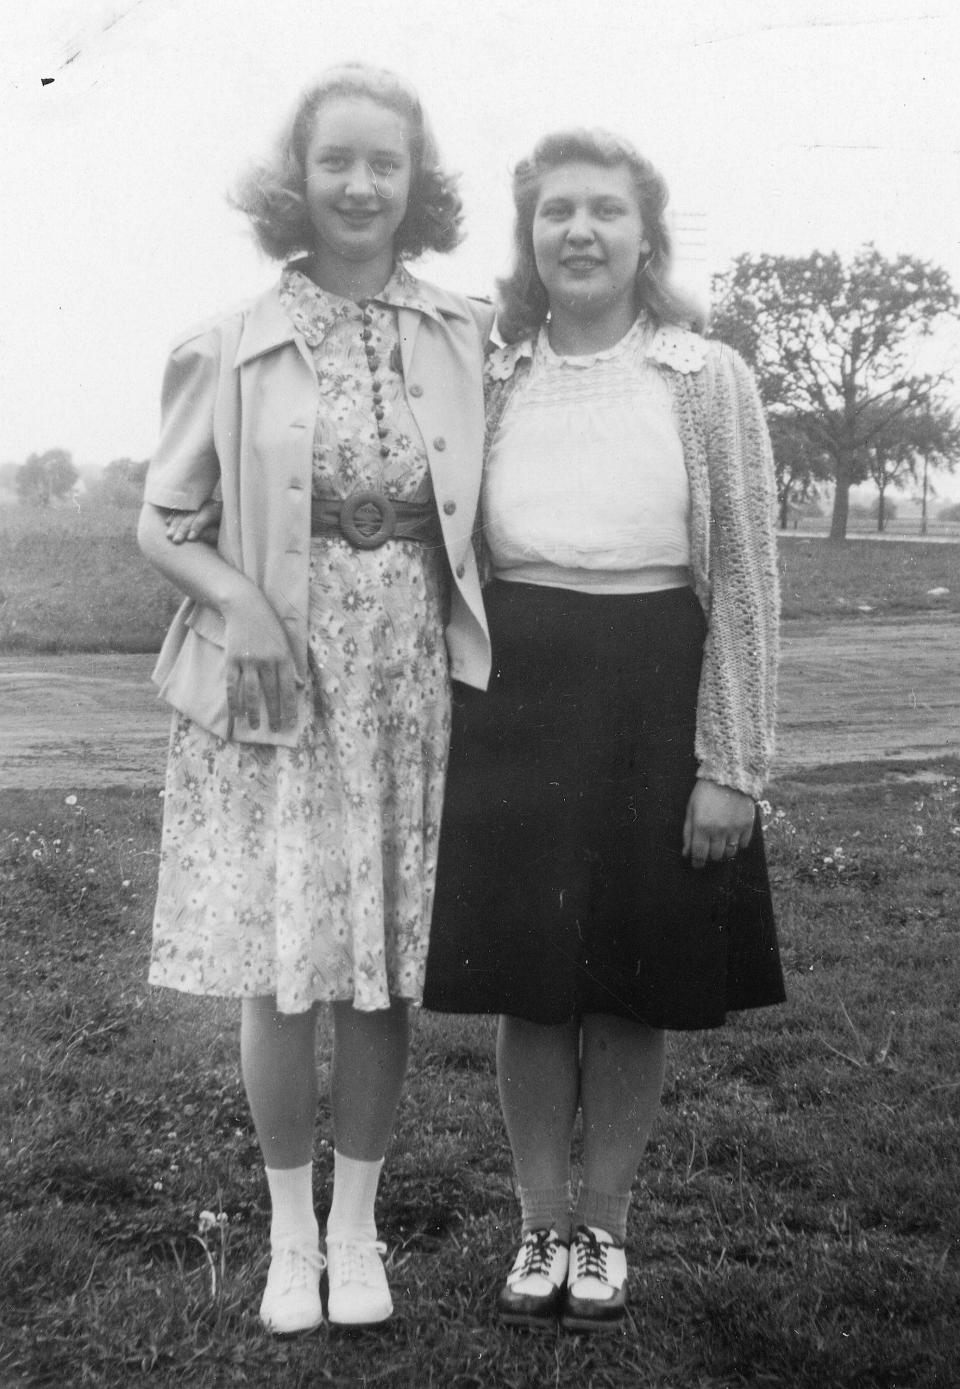 Eula Korn, left, and Catherine Peters Couch pose for a photo in 1942 in South Bend. The two women were passengers on the S.S. Noronic in 1949 when it caught fire in the early morning hours of Sept. 17 in Toronto Harbour in Canada. Both survived.